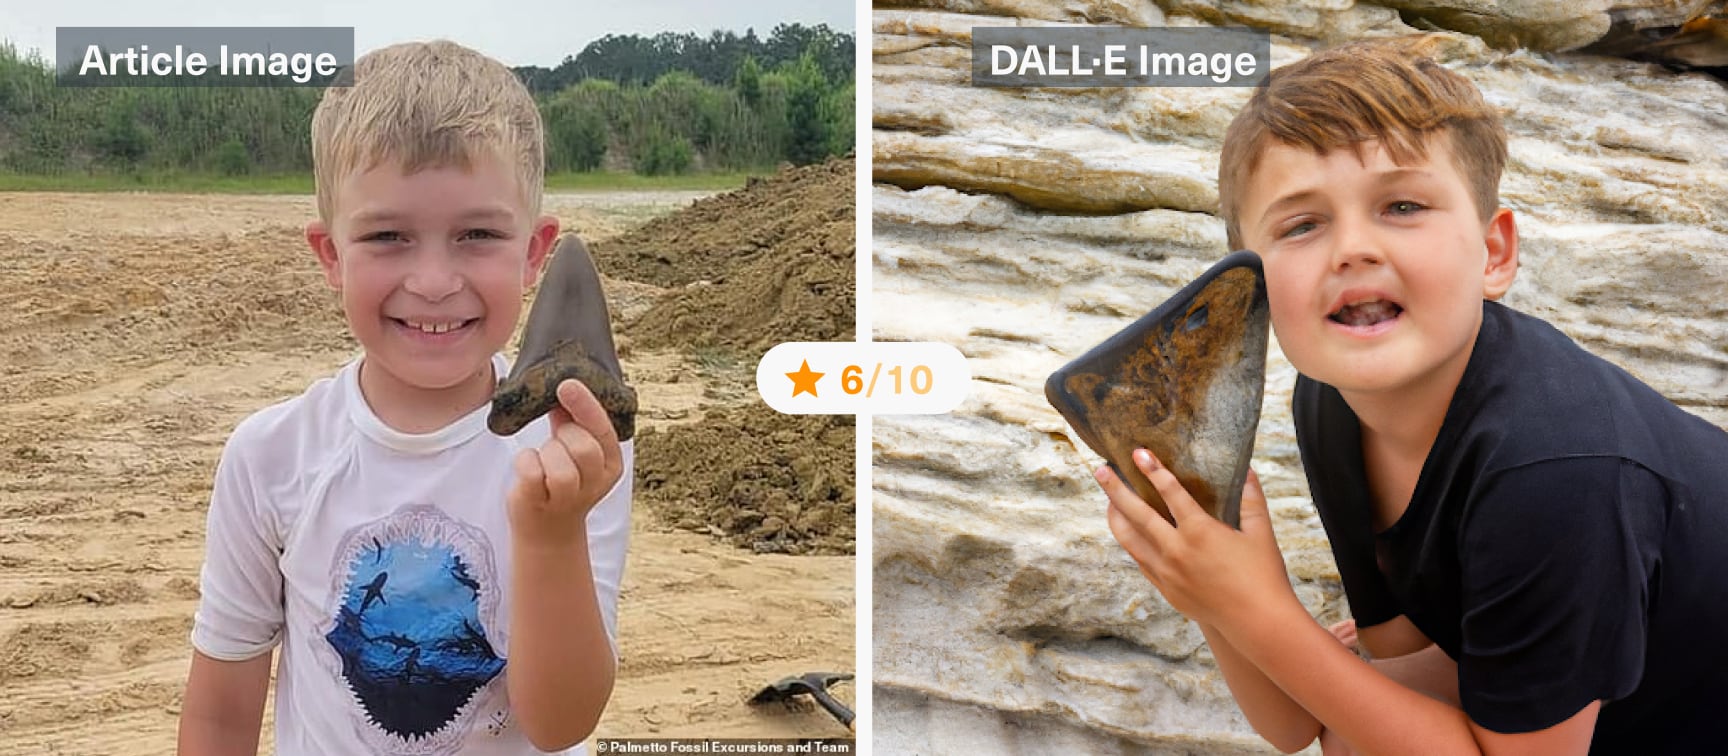 DALL-E meets News API: “8-year-old boy finds huge tooth from shark that lived 22 million years ago”